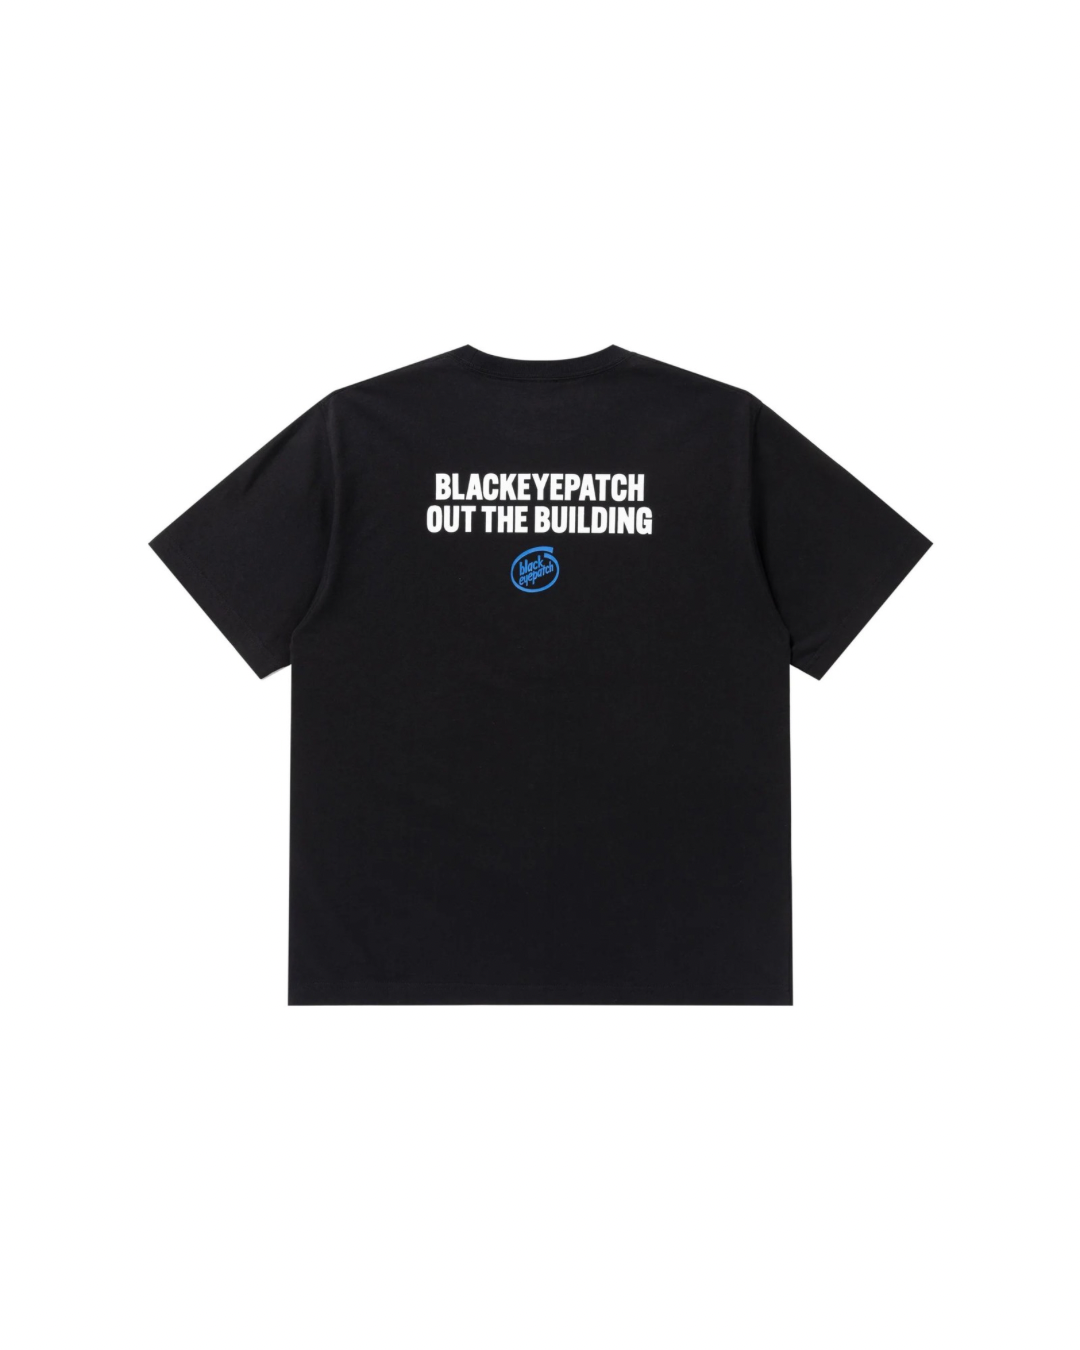 【BLACKEYEPATCH】OUT THE BUILDING TEE - BLACK